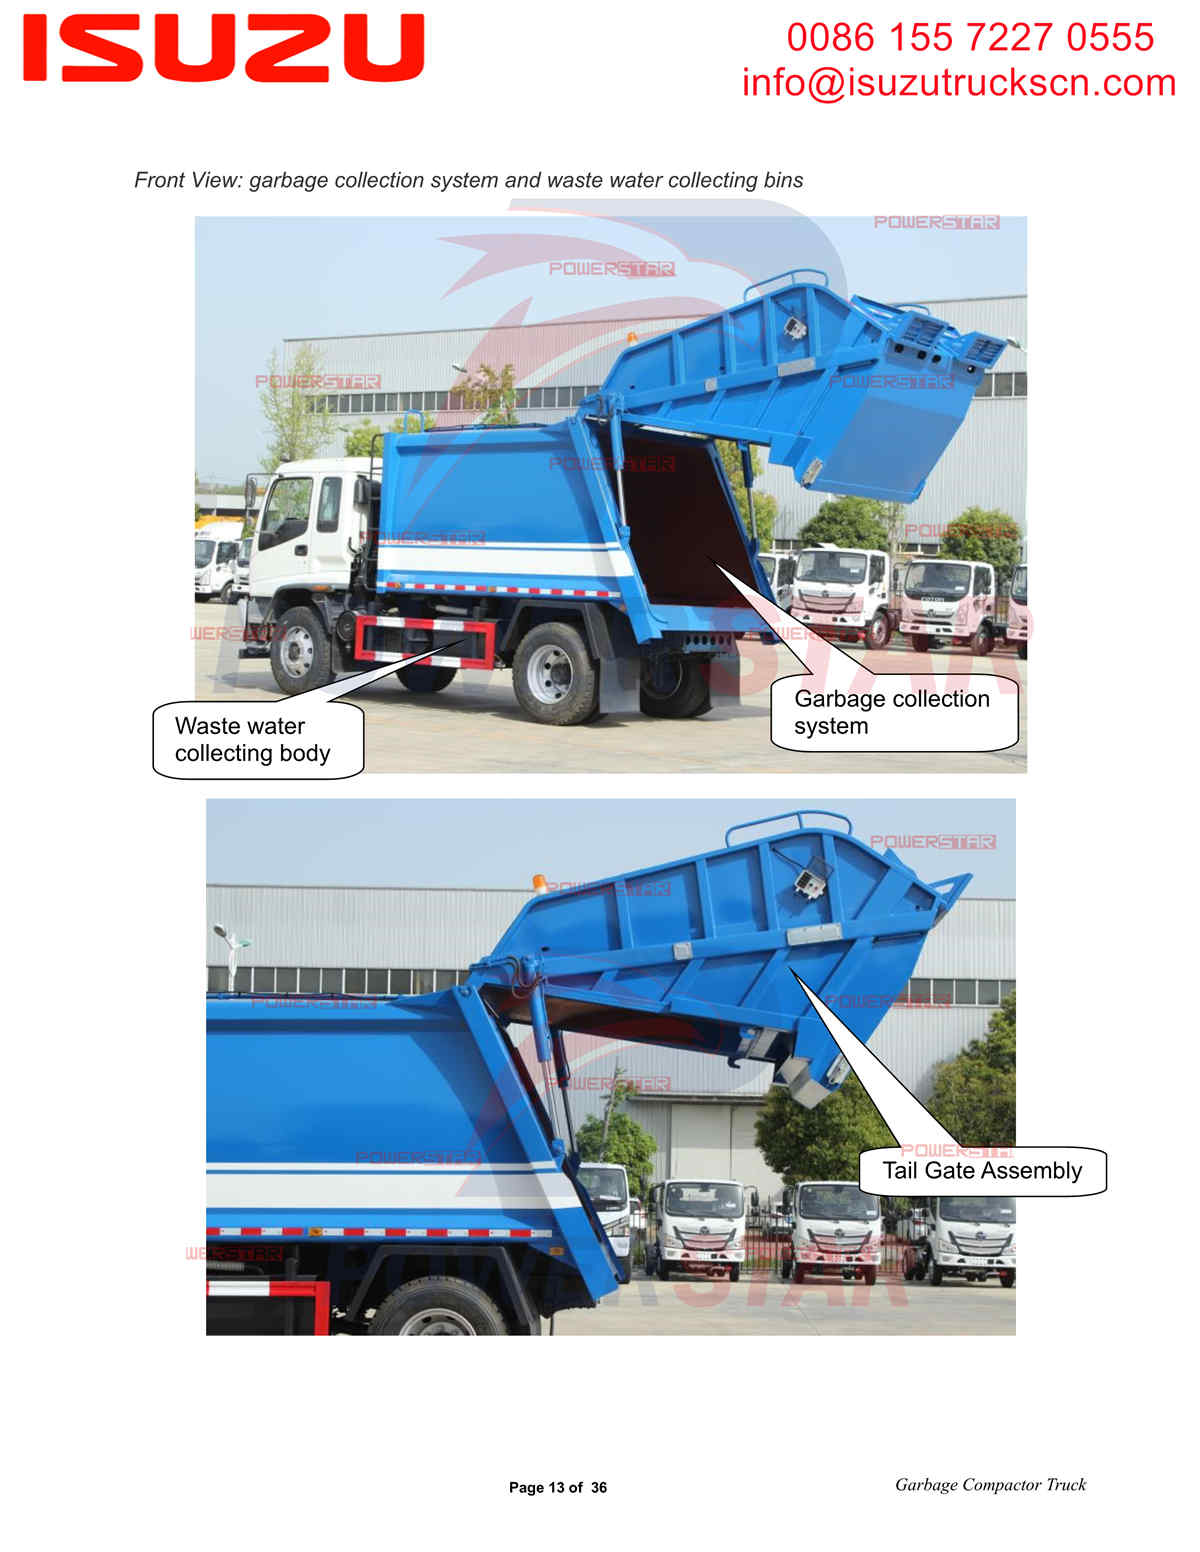 POWERSTAR Garbage Compactor Superstructure Operation Manual